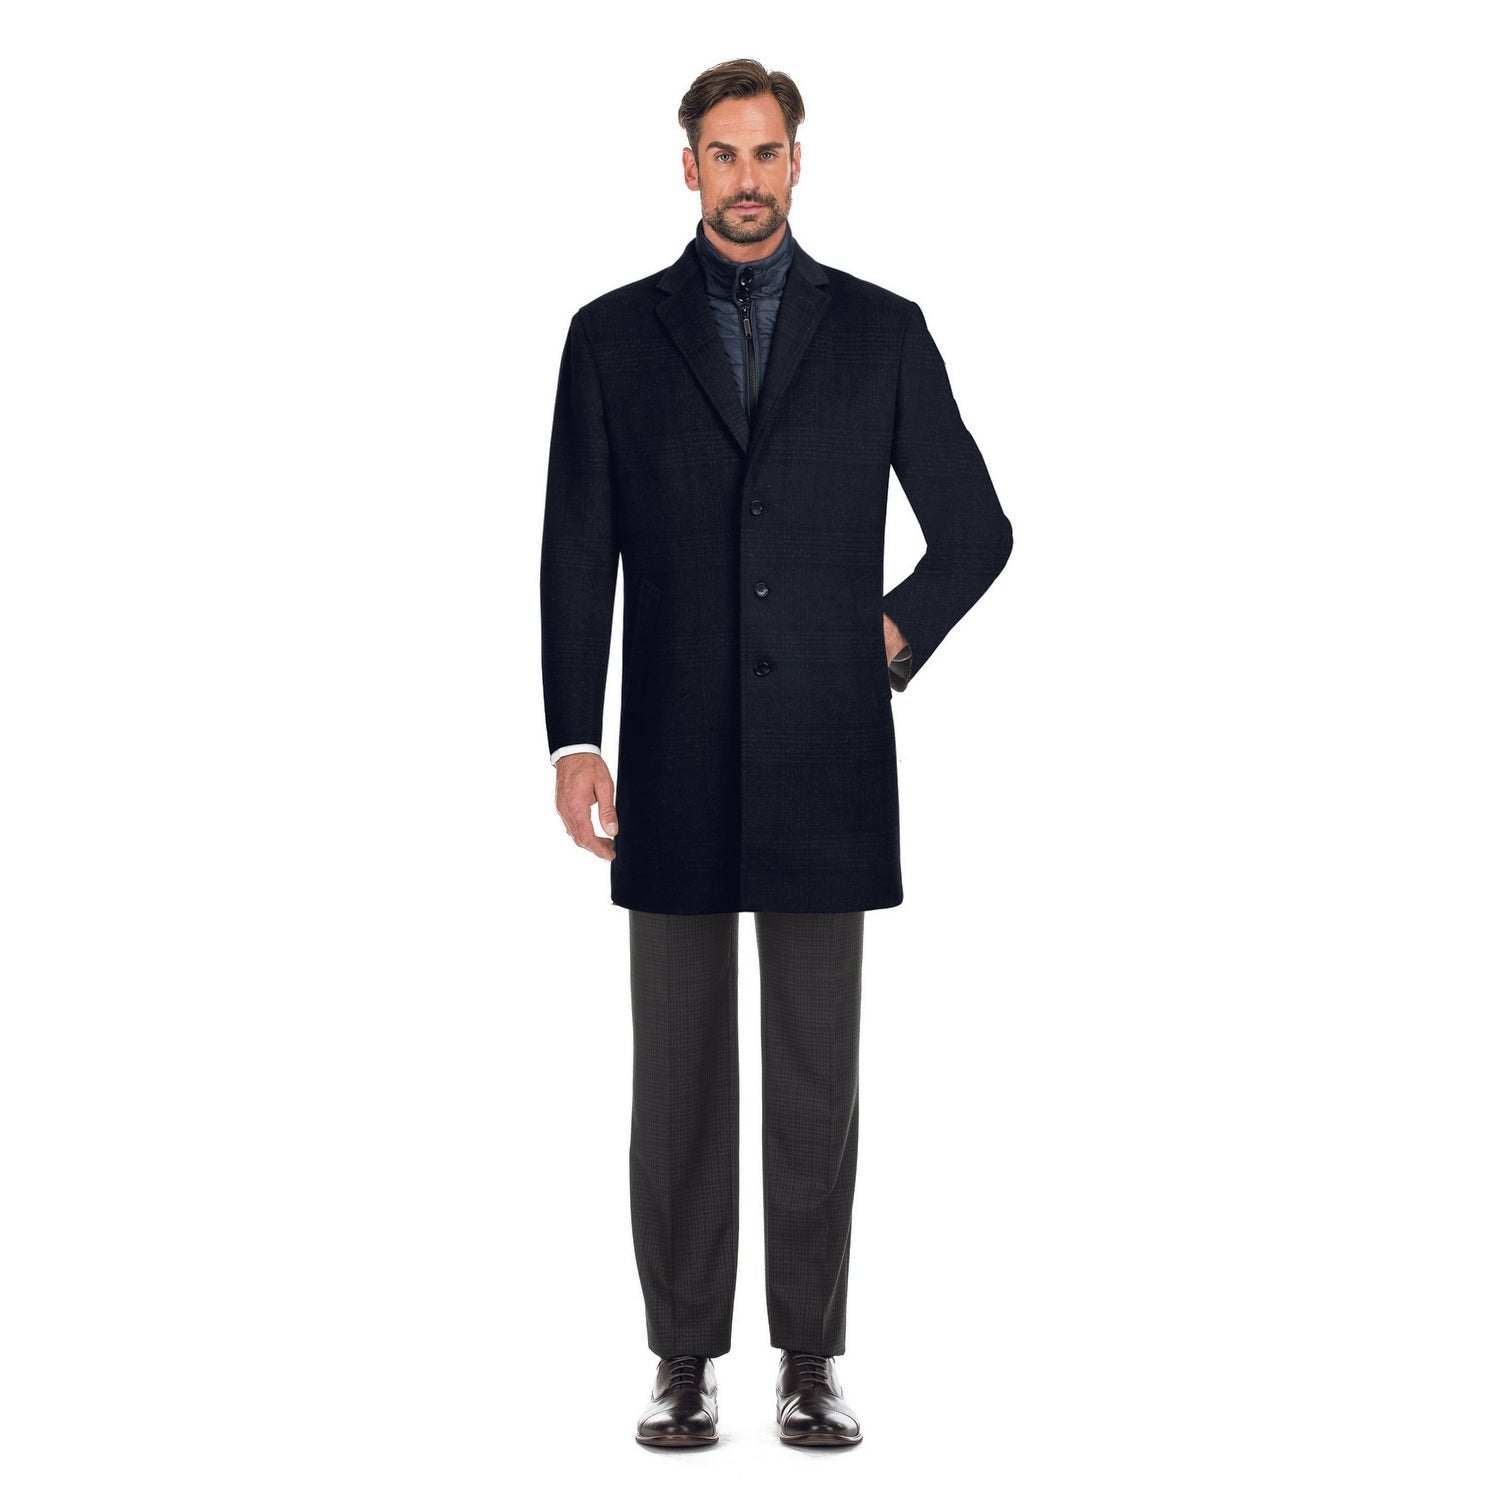 Wool Blend SLIM FIT Overcoat with Removable Quilted Liner in Navy Check by English Laundry